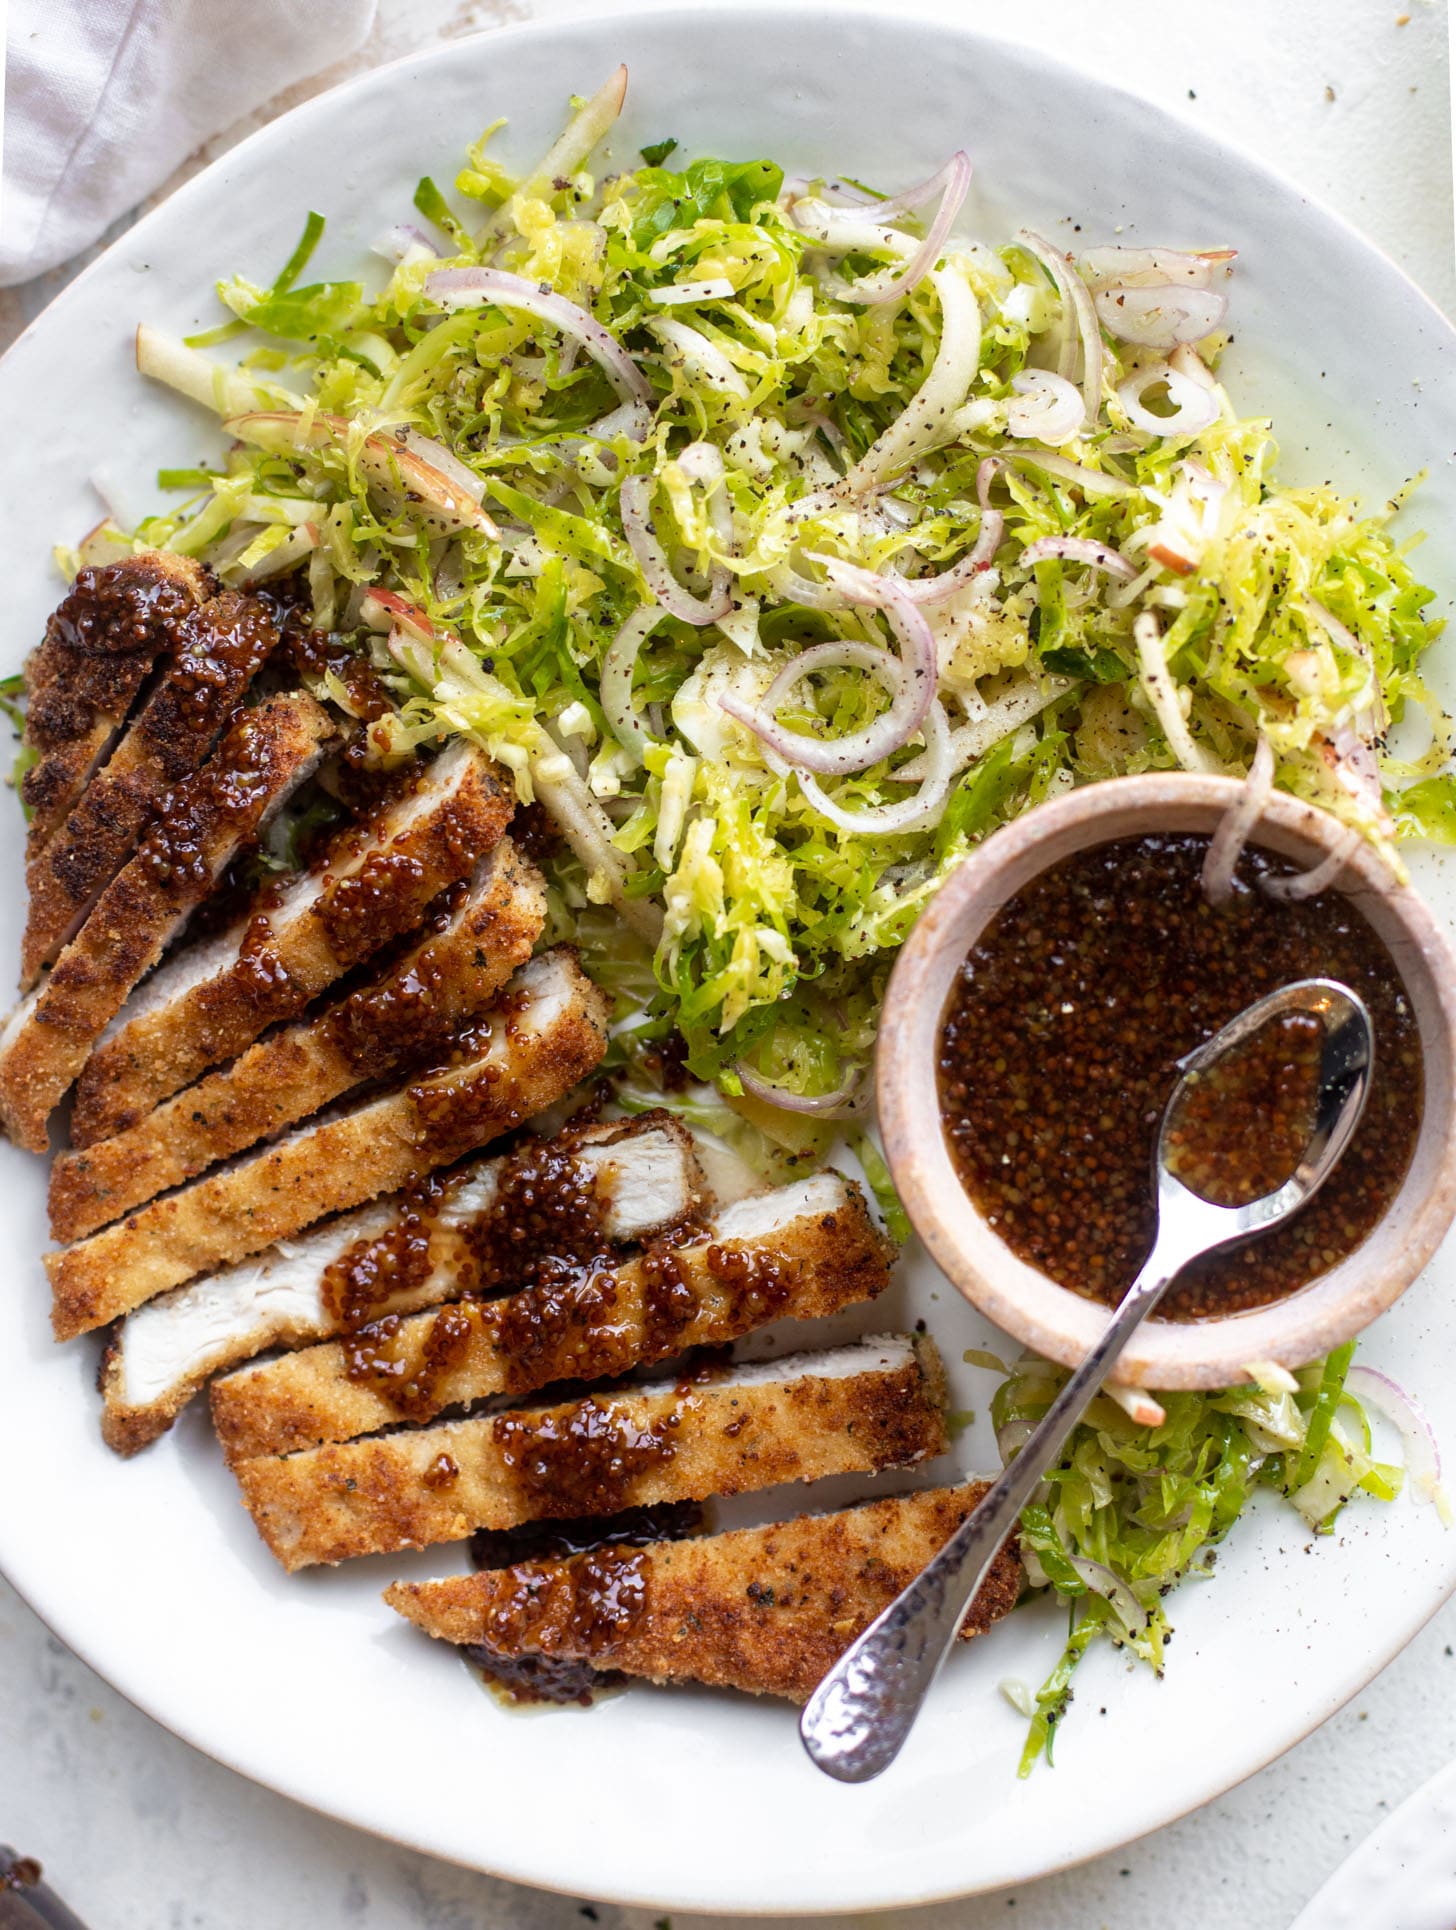 pork schnitzel with carolina gold BBQ sauce & brussels sprouts slaw